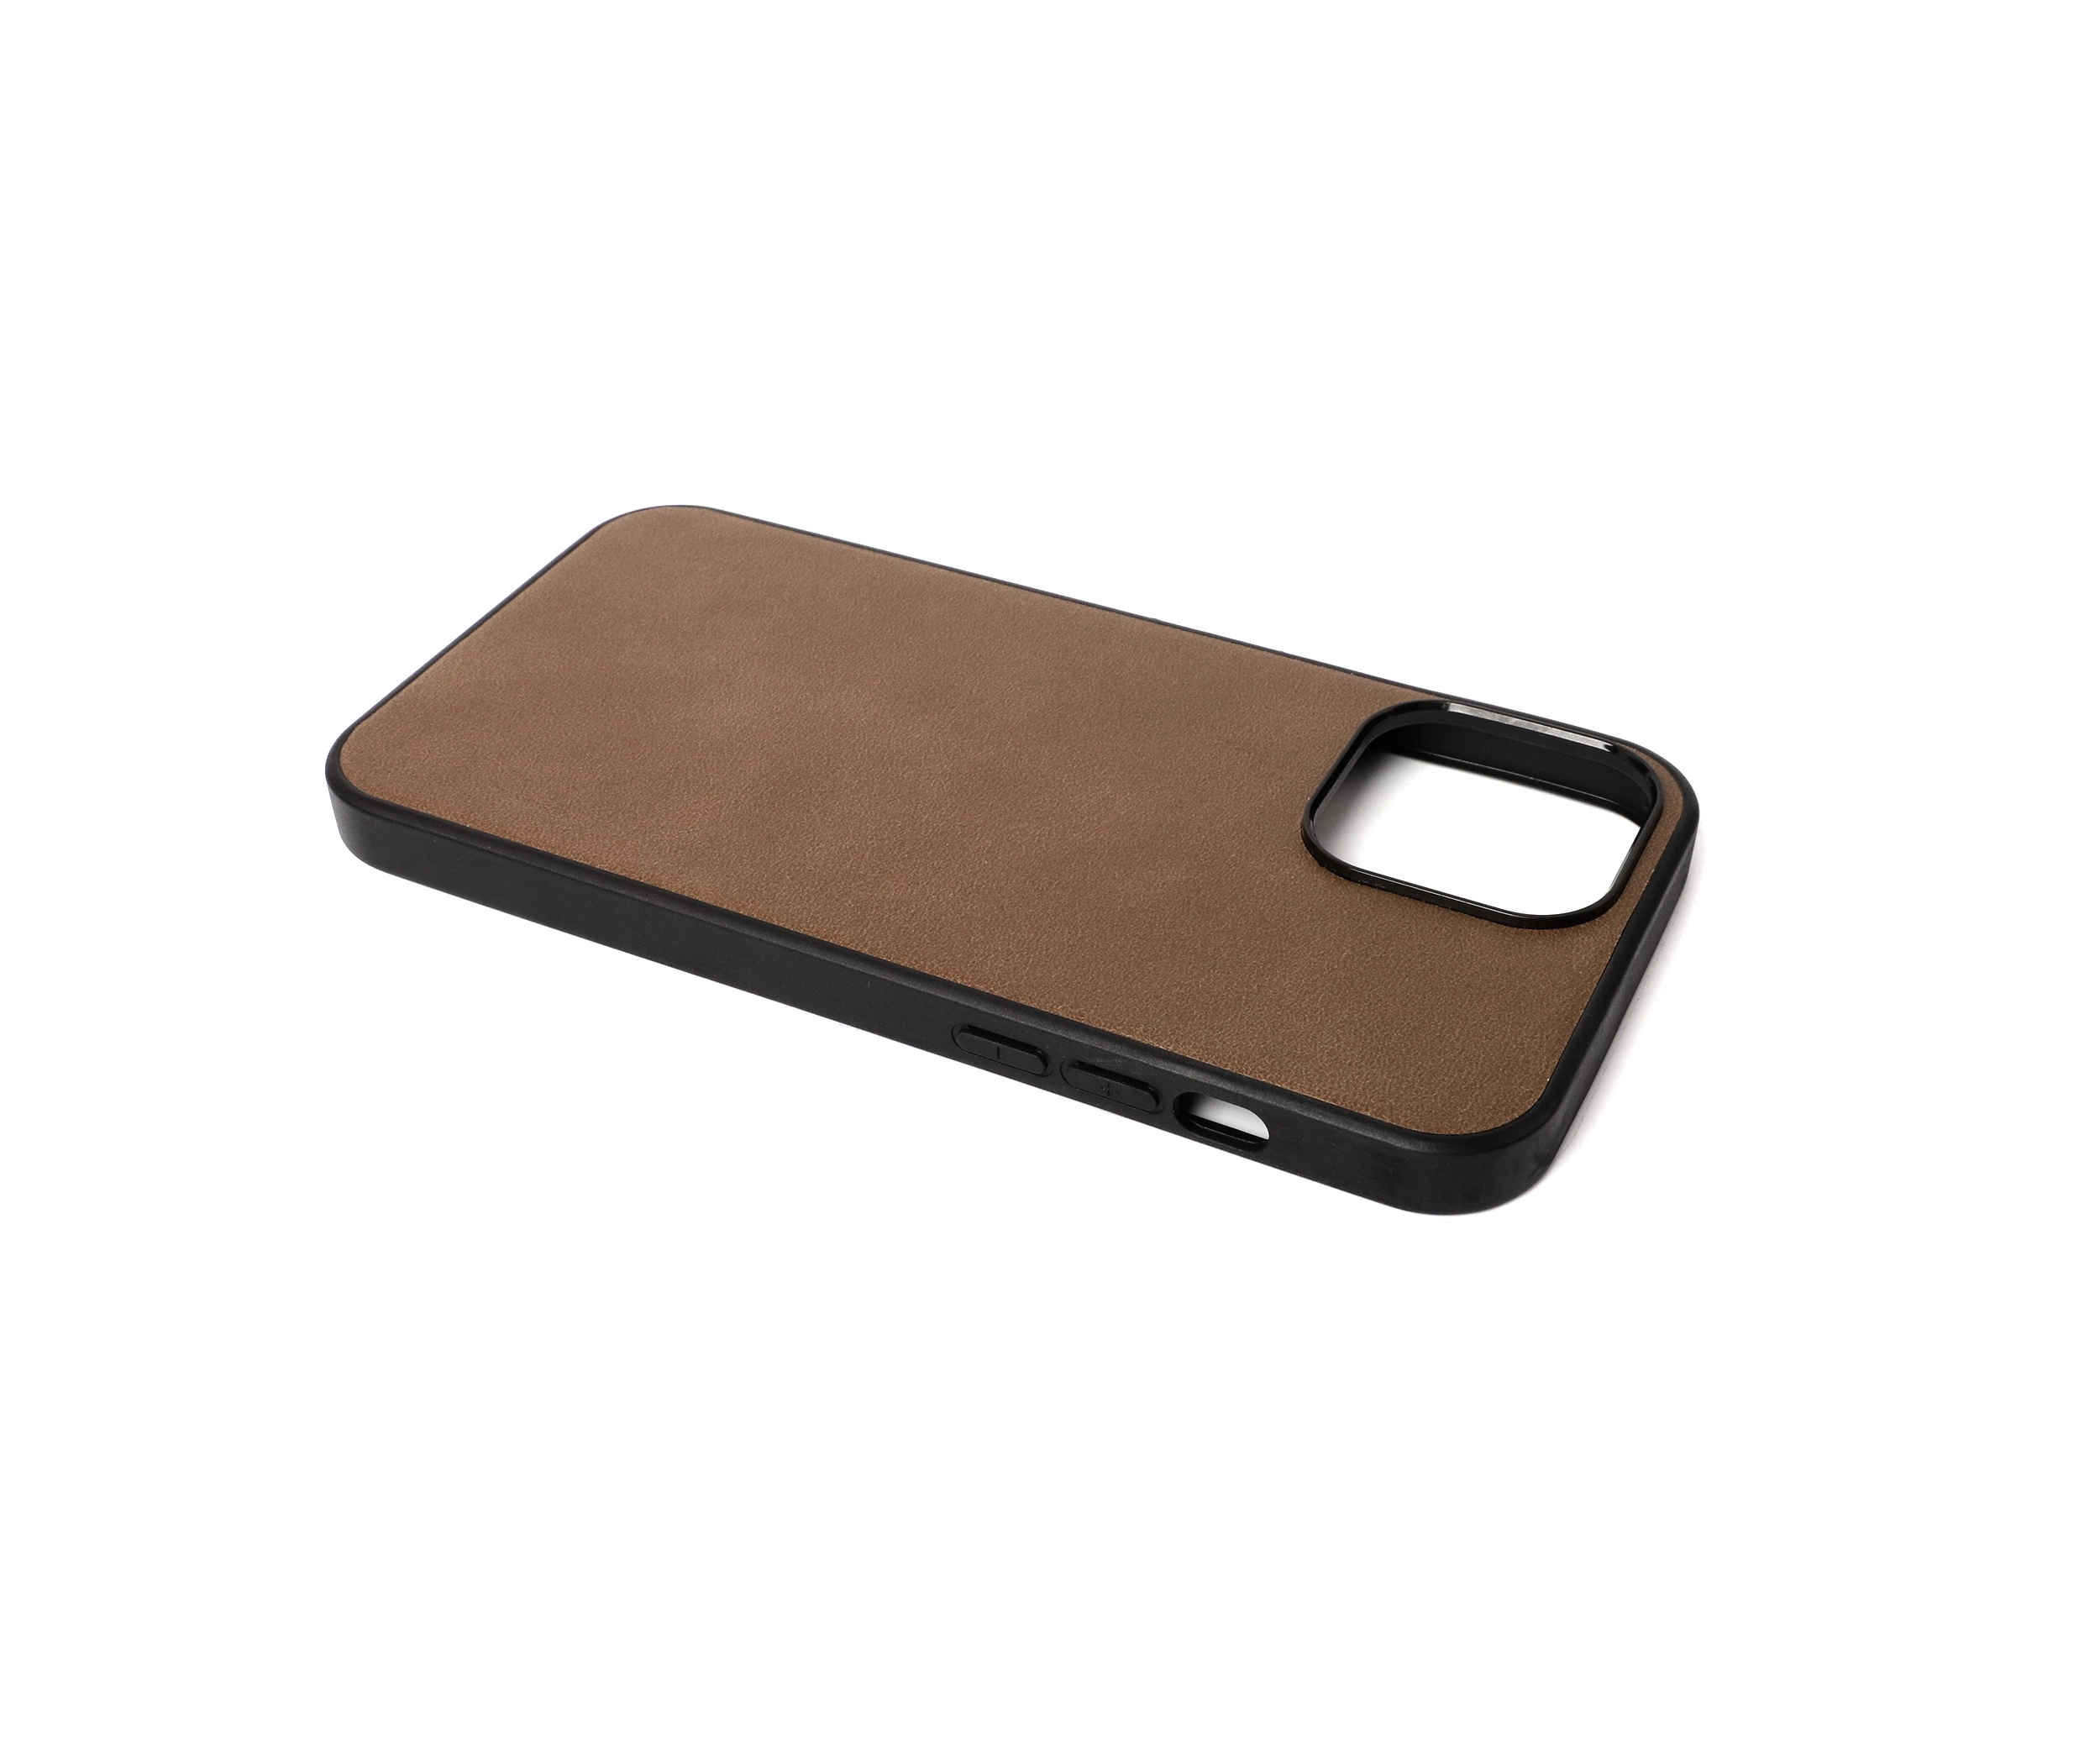 iPhone Leather Cases Wholesale Benefits